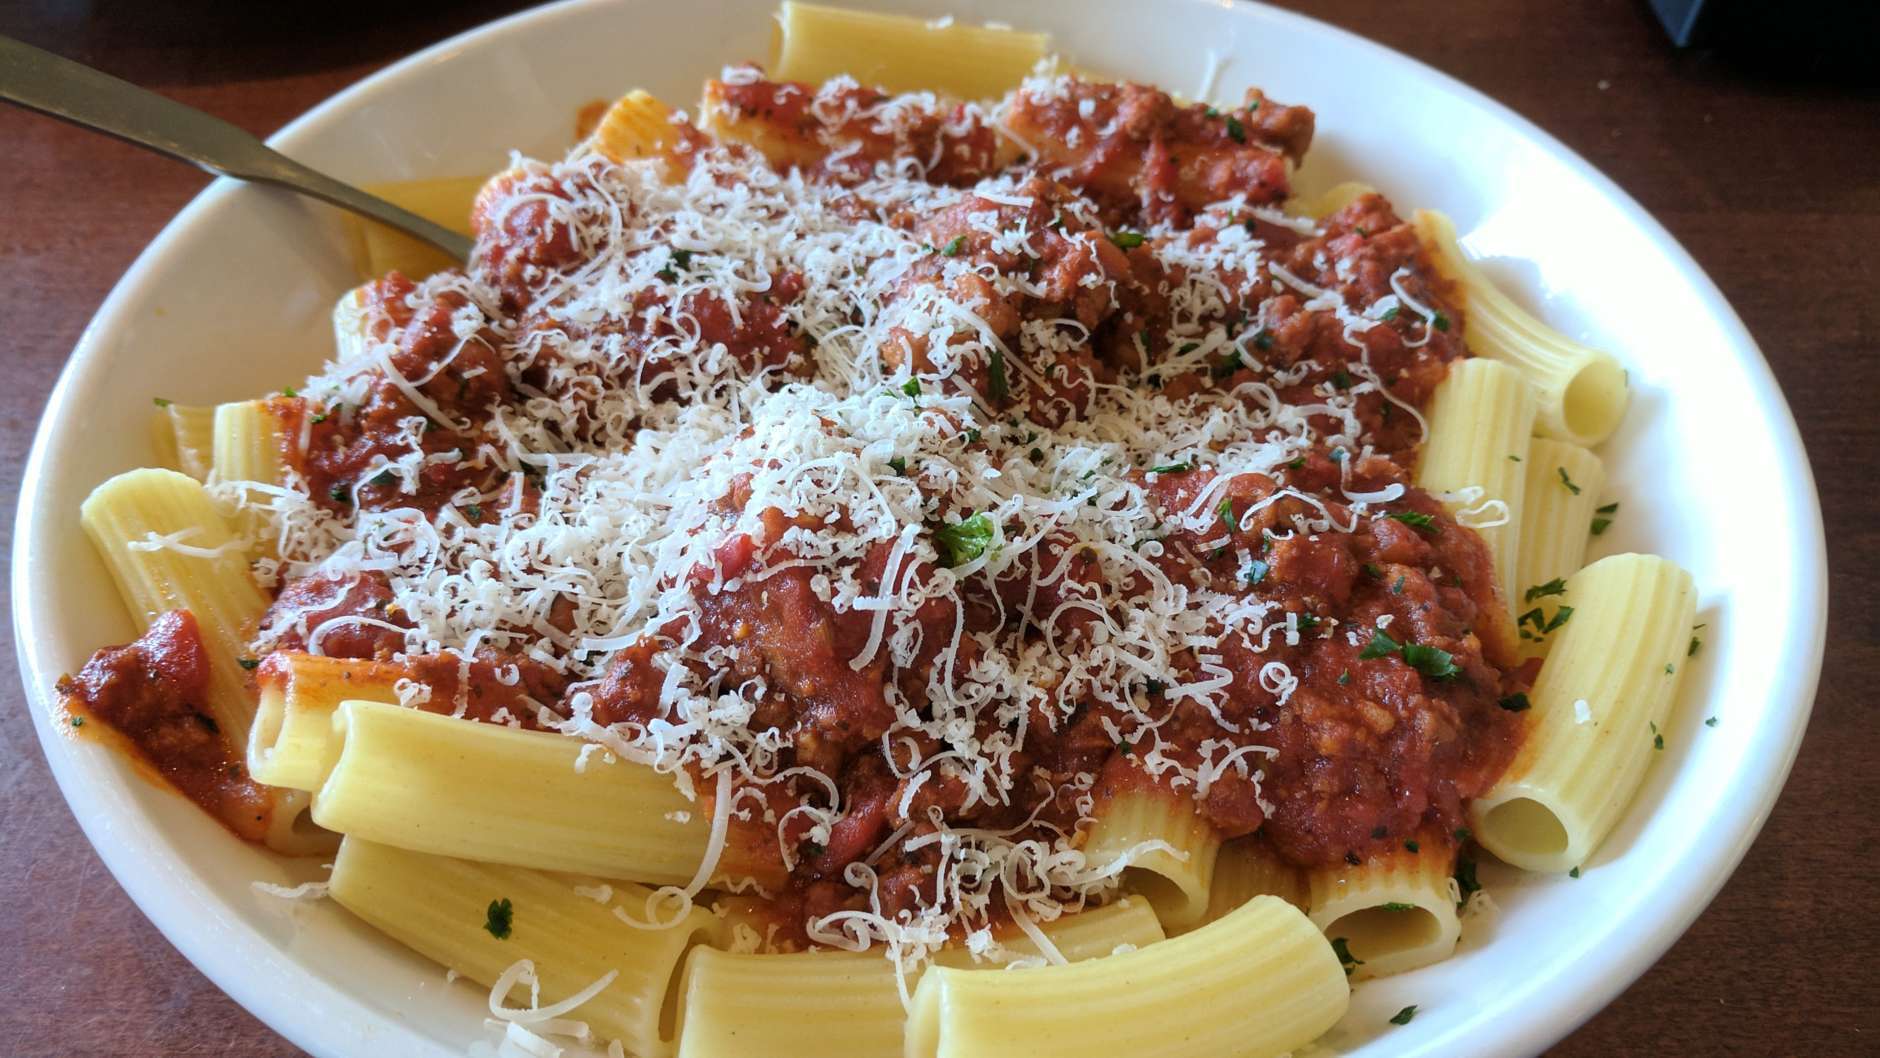 The meal: Rigatoni with traditional meat sauce and meatballs. (WTOP/Brandon Millman)